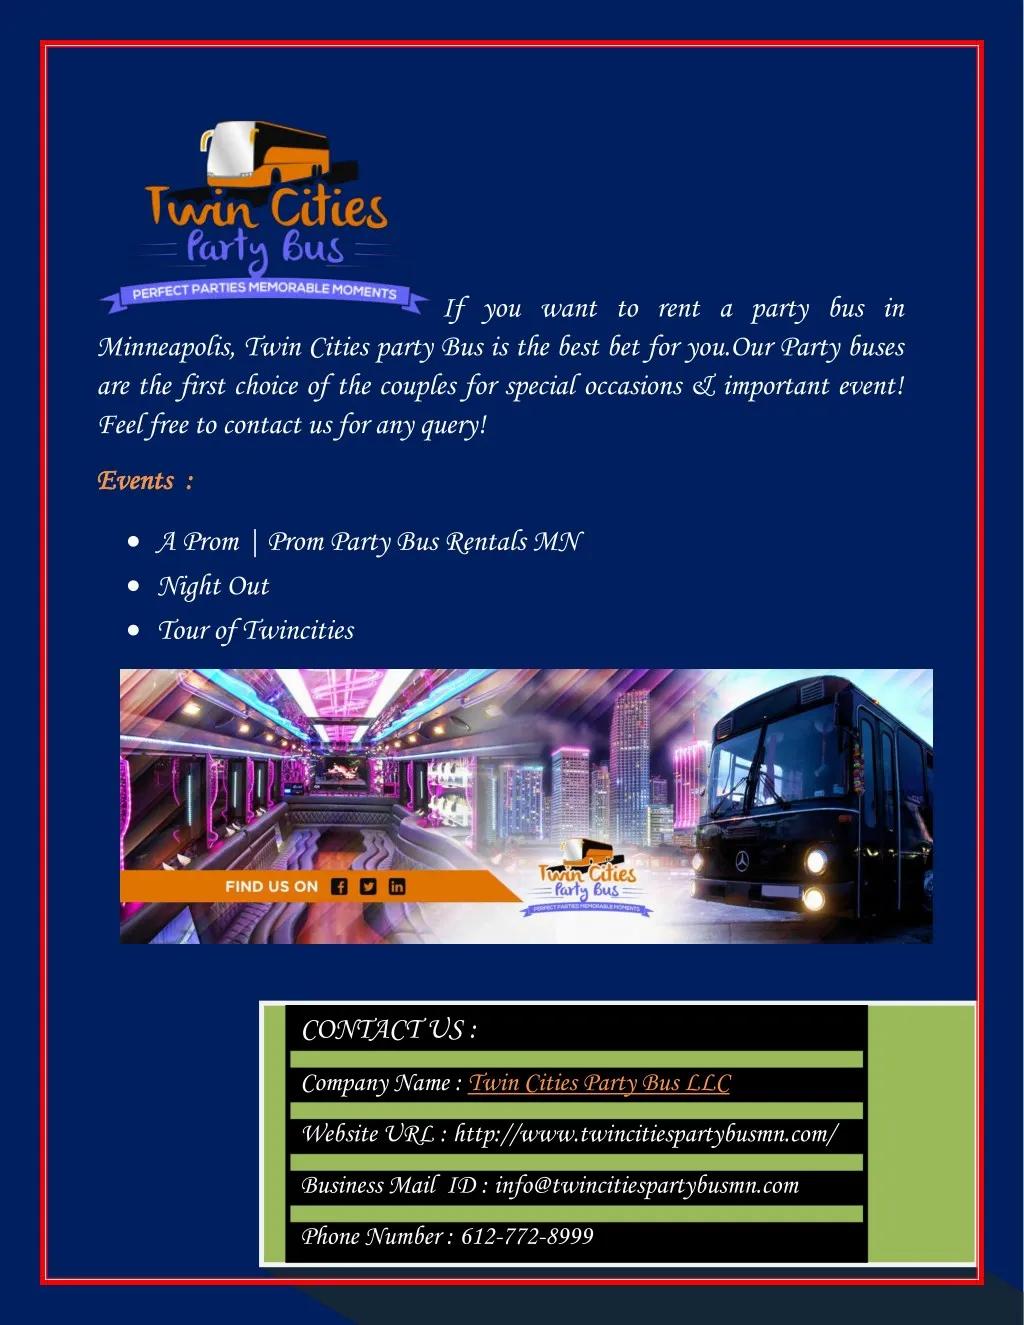 if you want to rent a party bus in